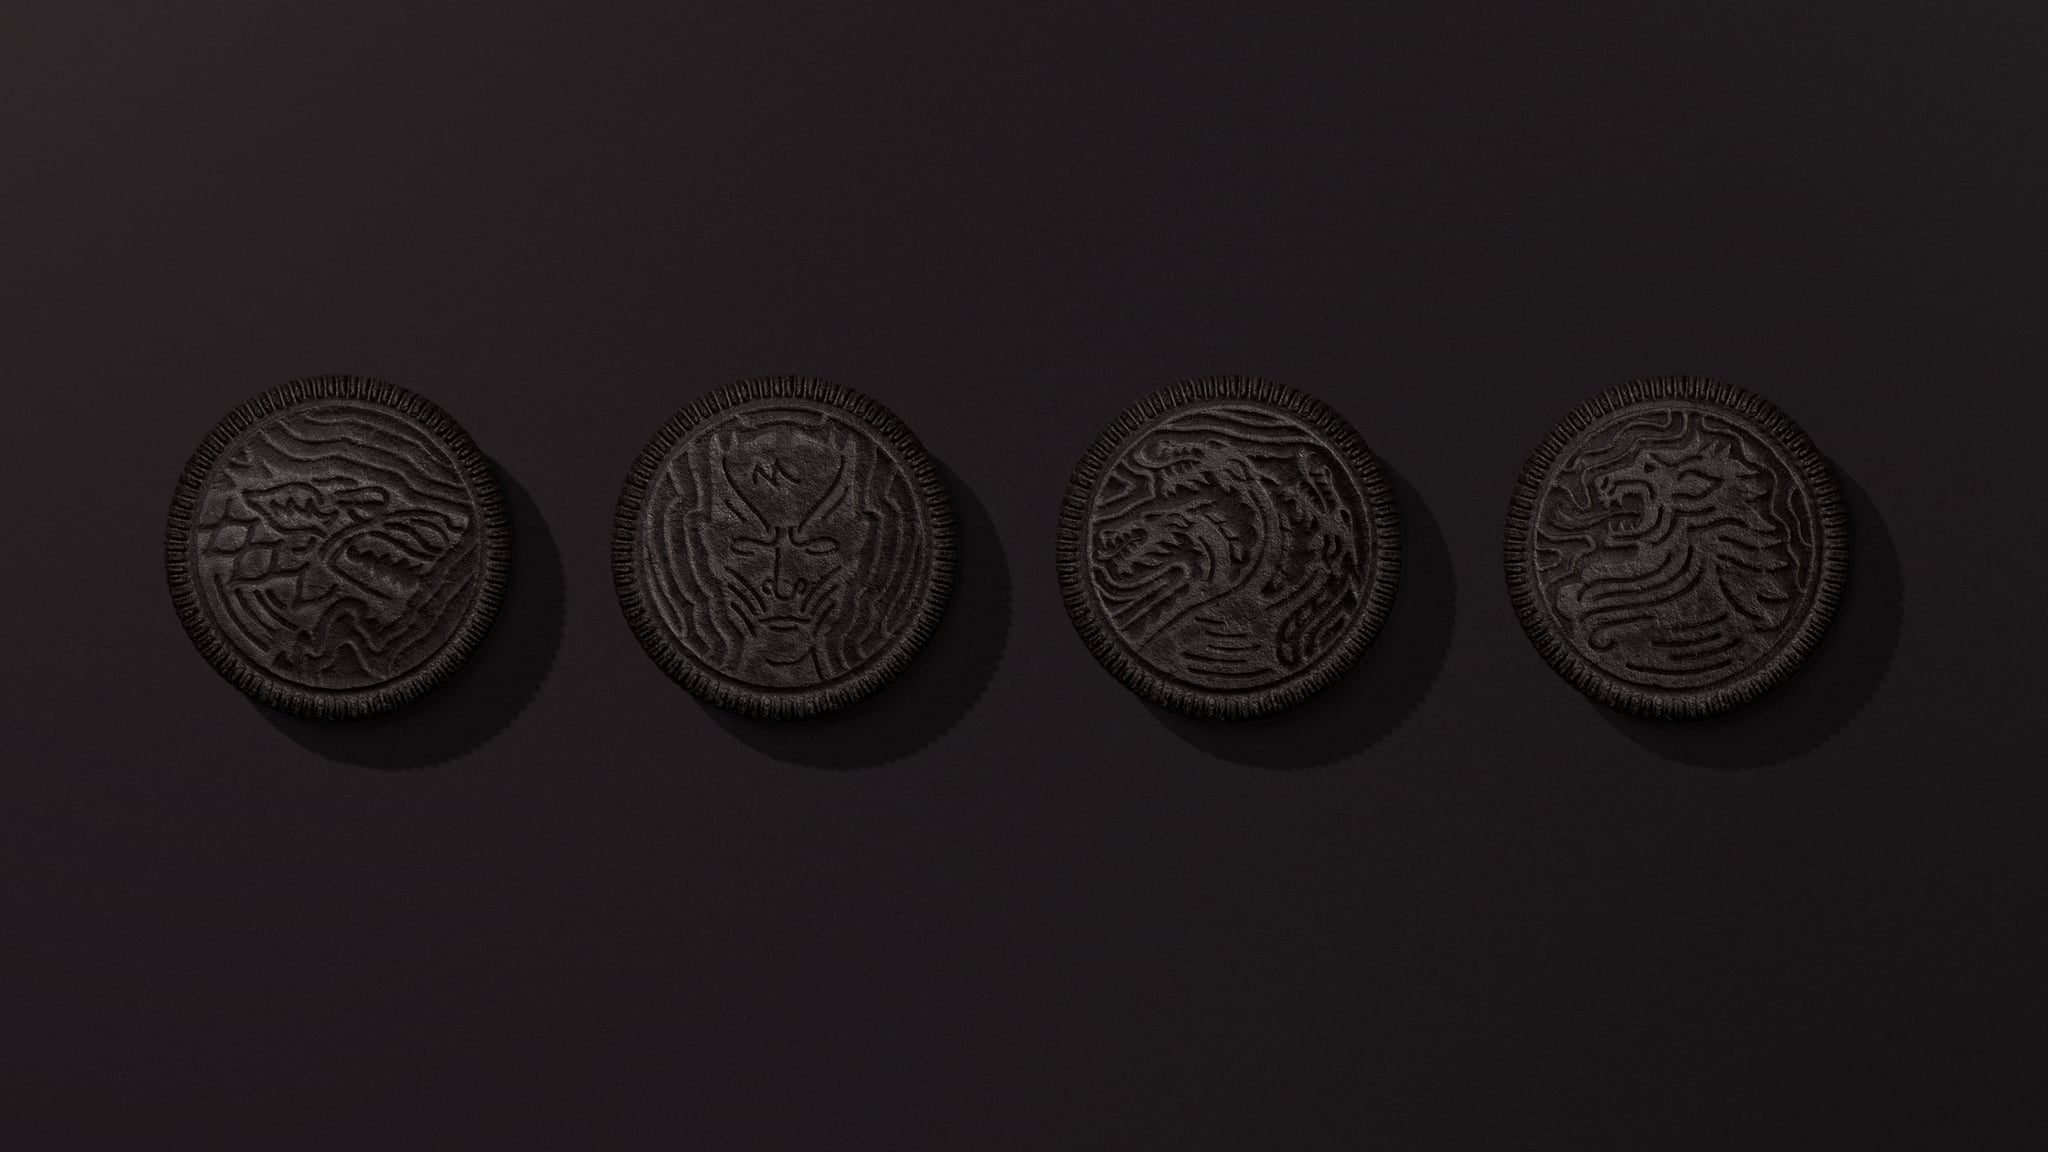 Oreo's new Game of Thrones cookie collection is a dark treat for fans - Oreo